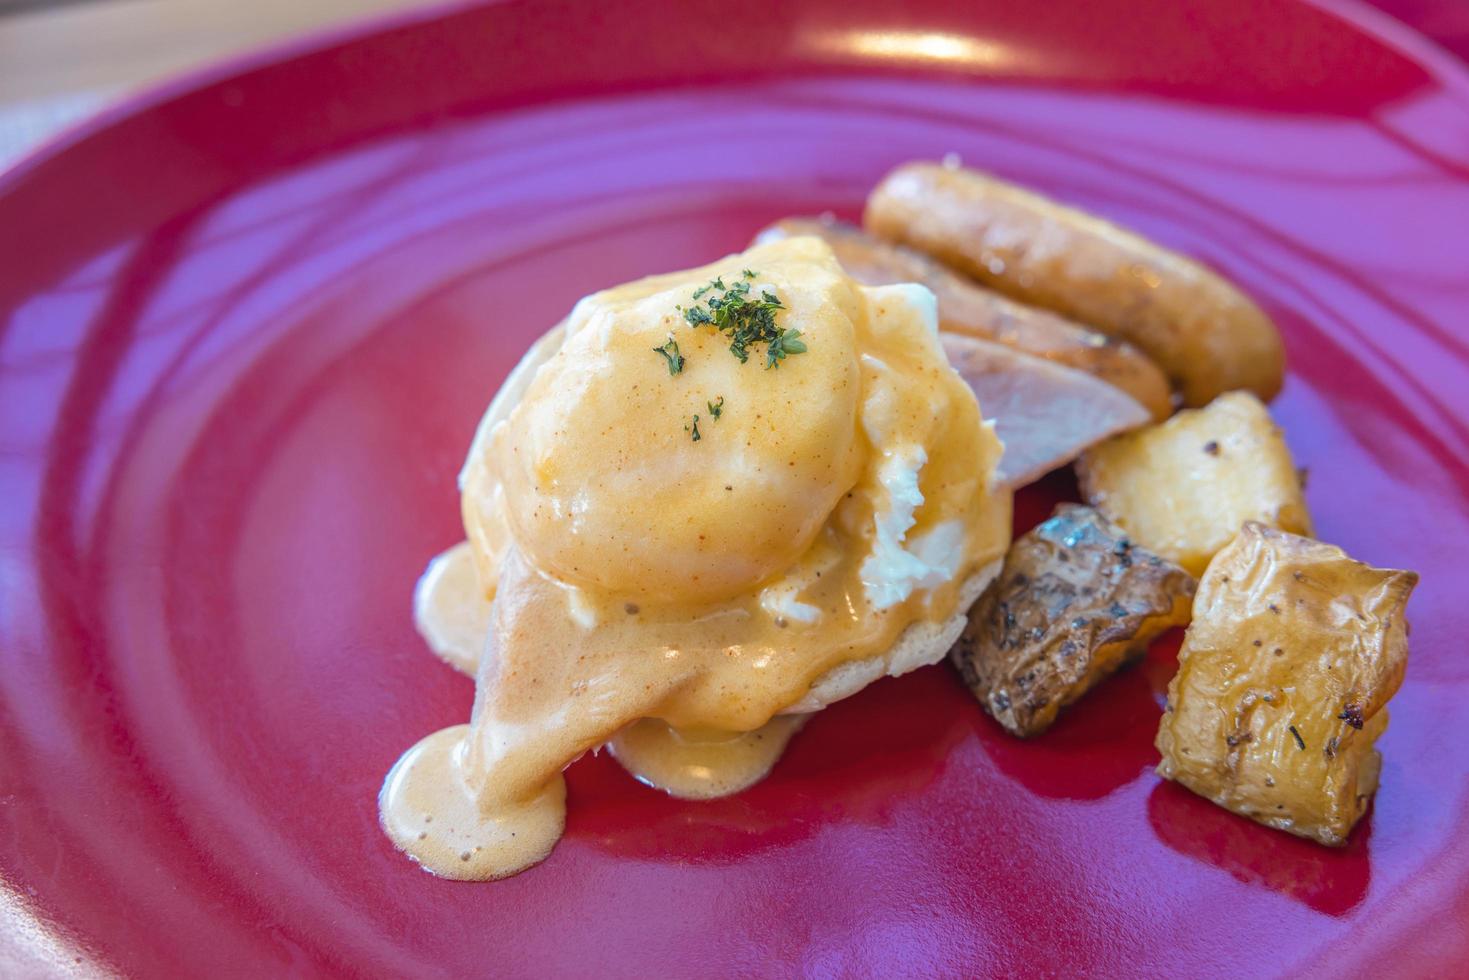 Egg Benedict in a red plate photo